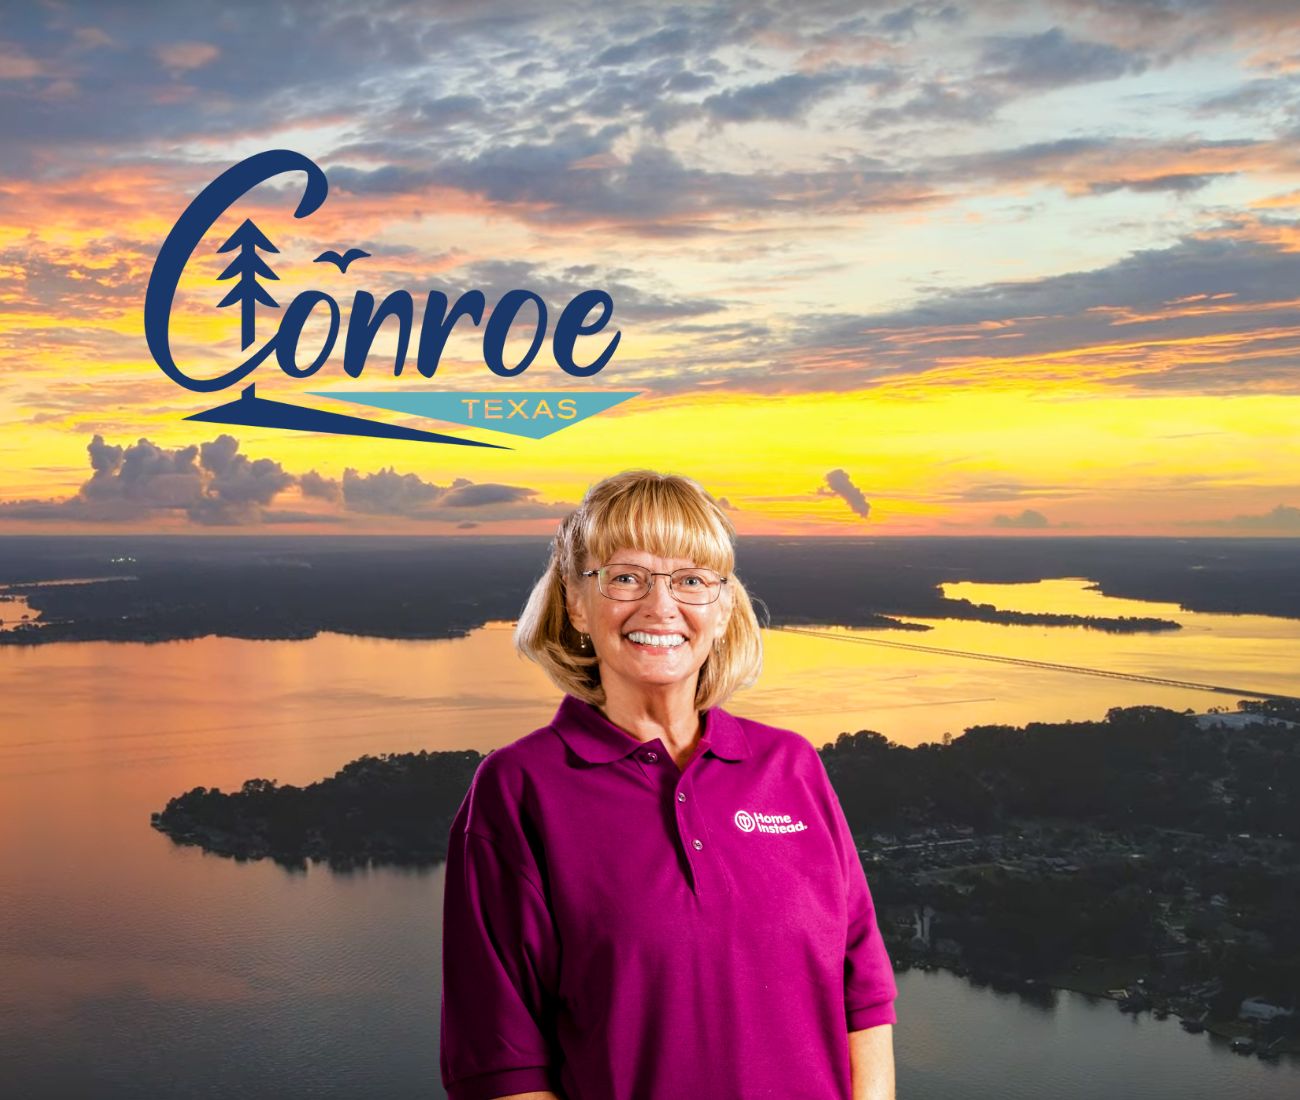 Home Instead caregiver with Conroe Texas in the background